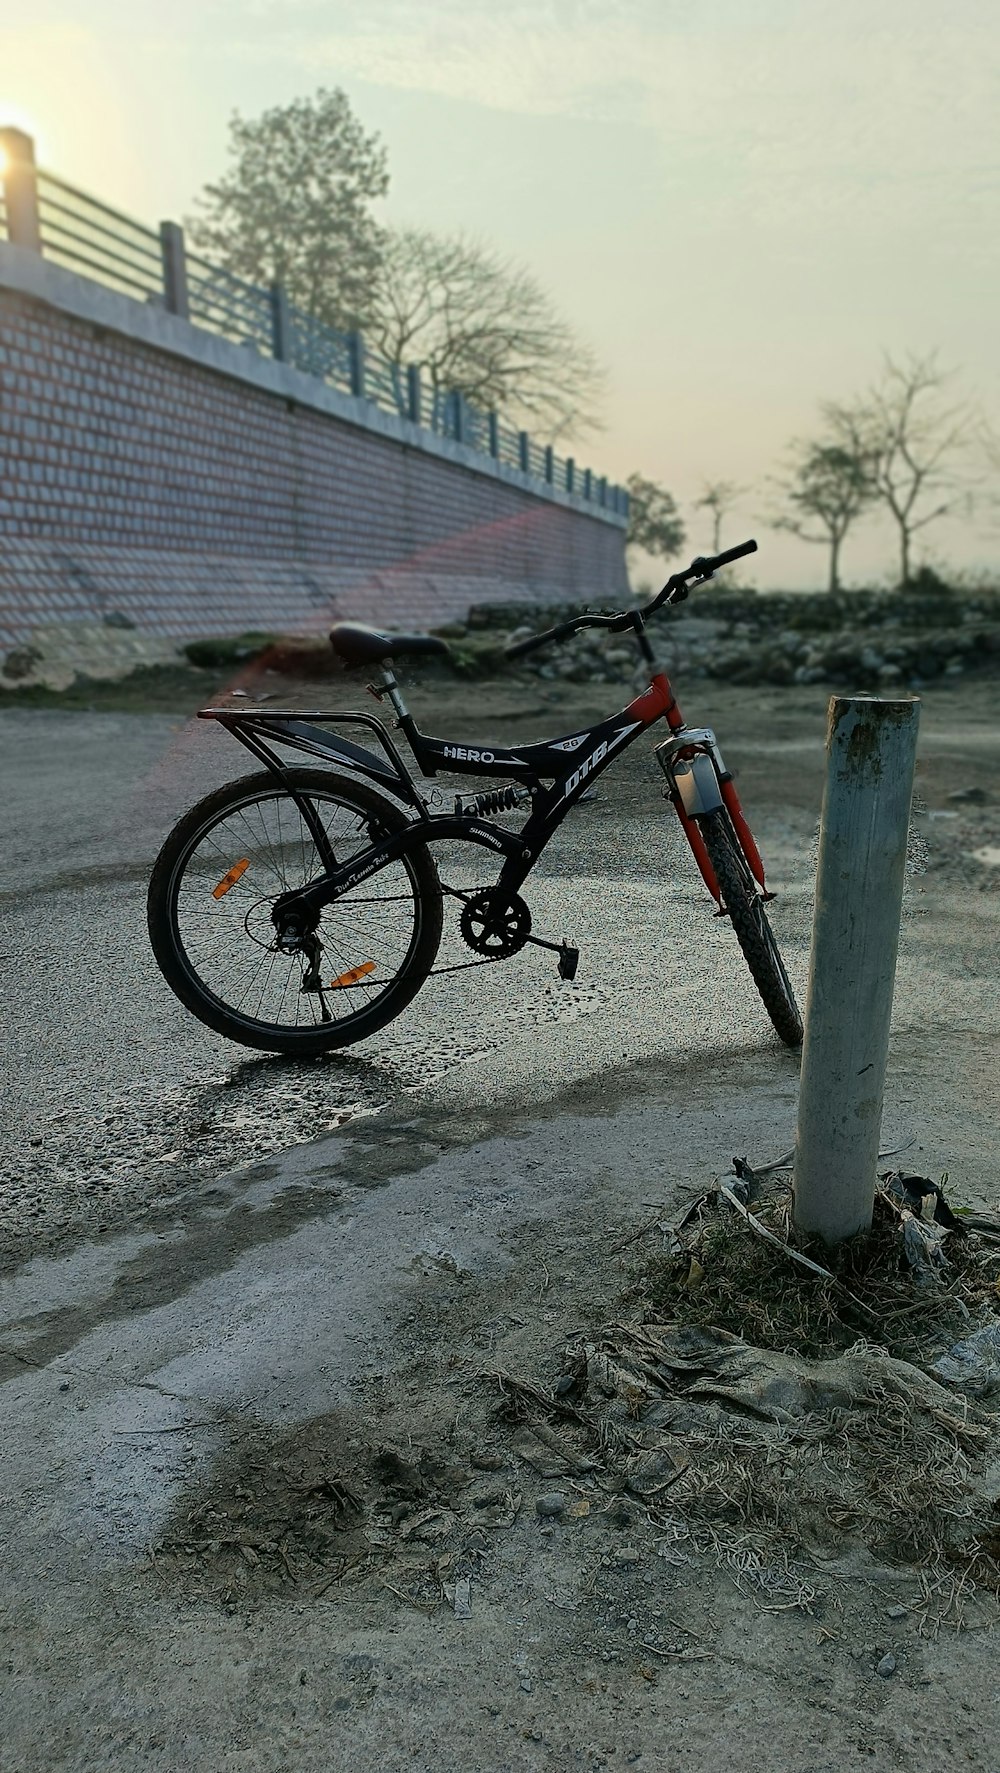 a bicycle leaning against a pole in a parking lot